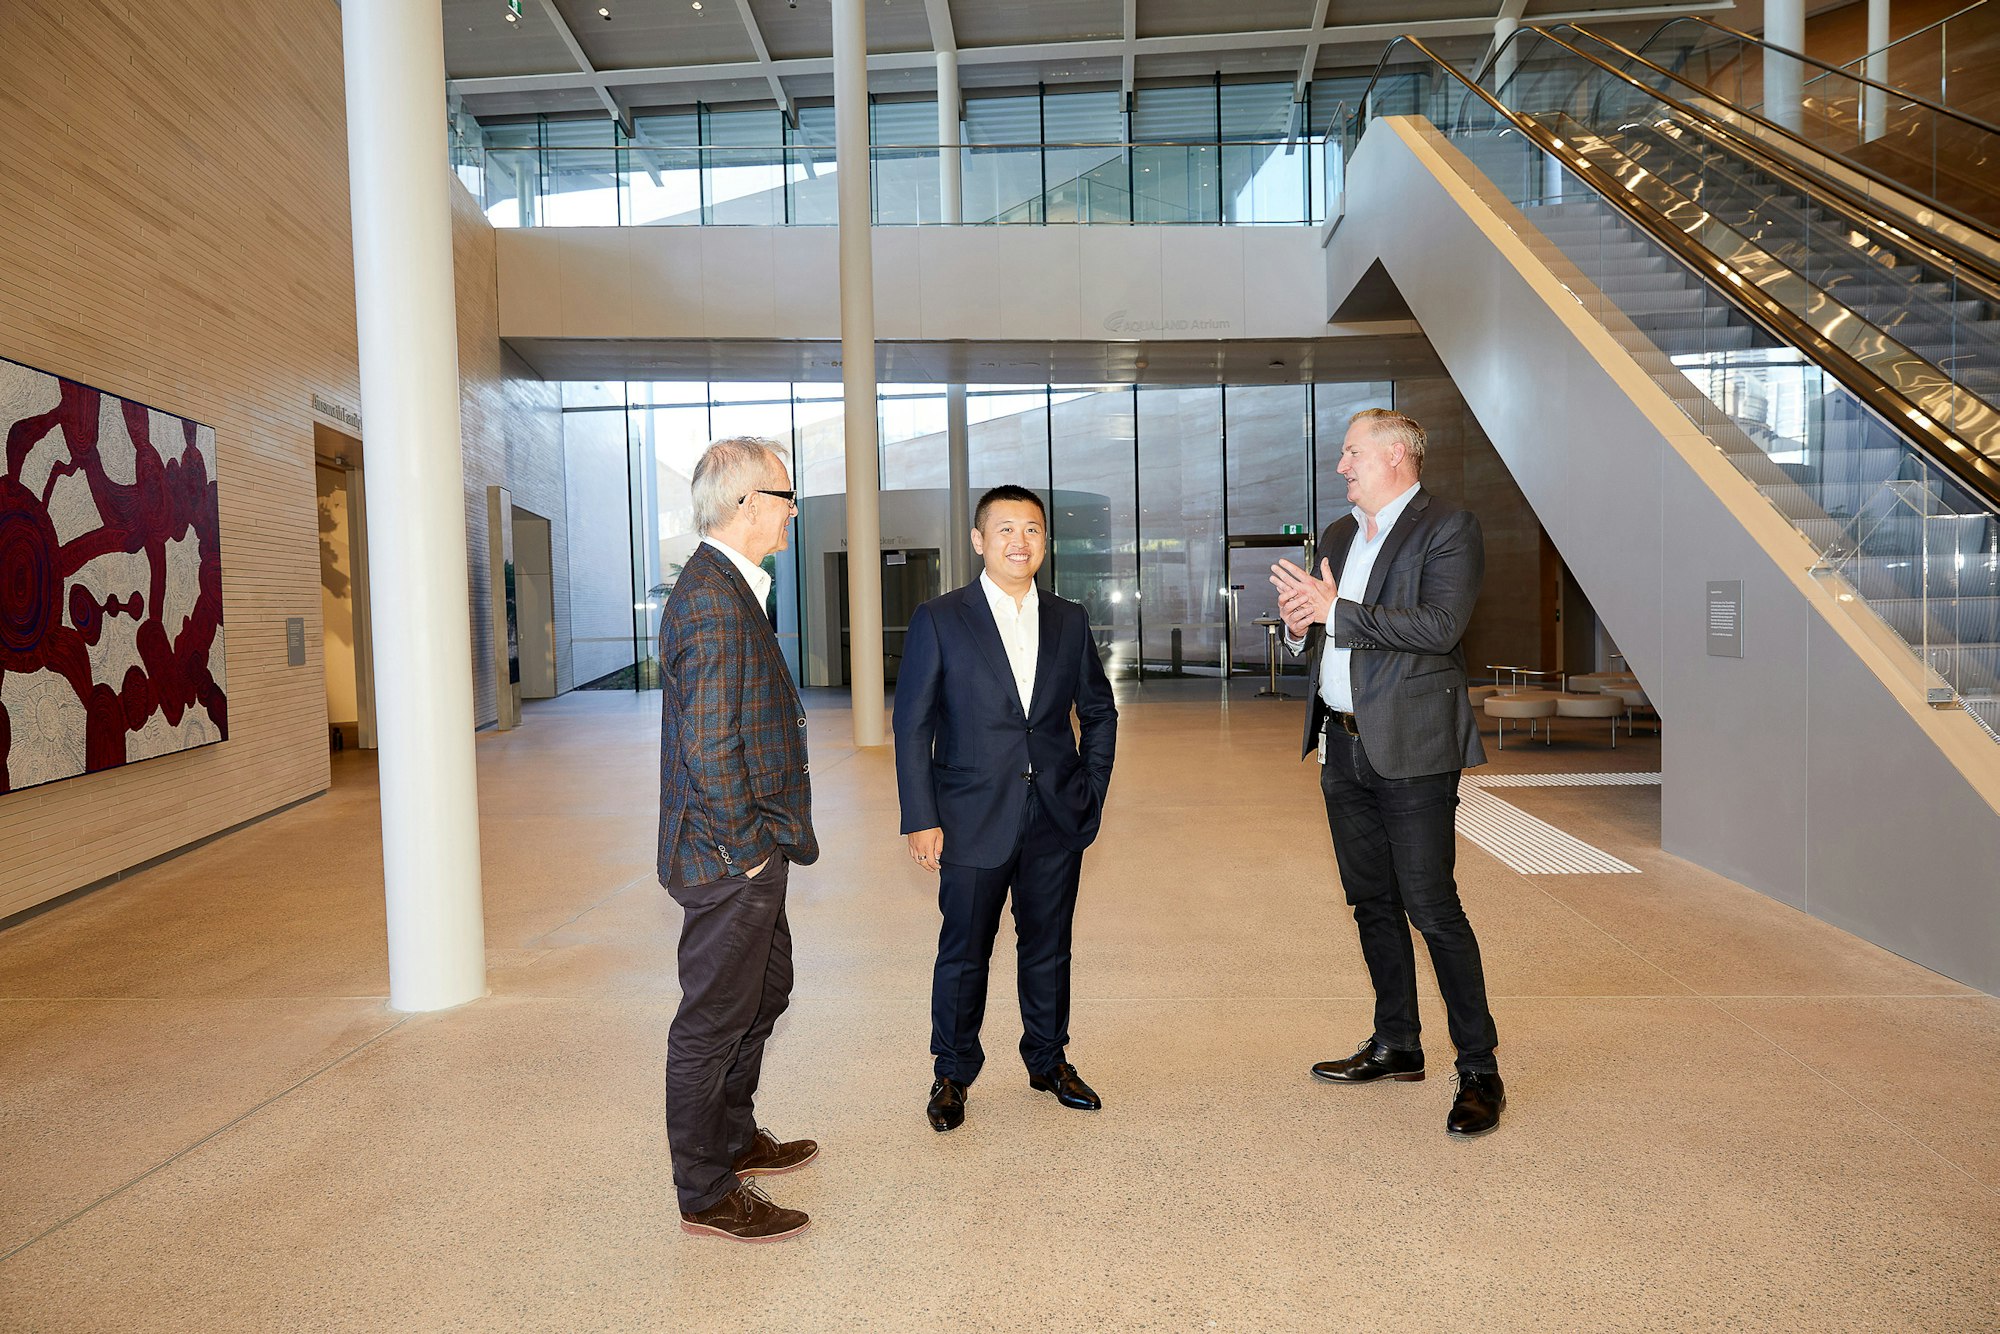 Art Gallery of New South Wales director Michael Brand, Aqualand managing director Jin Lin, and Art Gallery director of development John Richardson, in the Aqualand Atrium of the Art Gallery’s new building. Artwork in background: Betty Kuntiwa Pumani ‘Antara’ 2017, Art Gallery of New South Wales, acquired with funds provided by the AGNSW Board of Trustees 2017 © Betty Kuntiwa Pumani. Photo © AGNSW, Jenni Carter